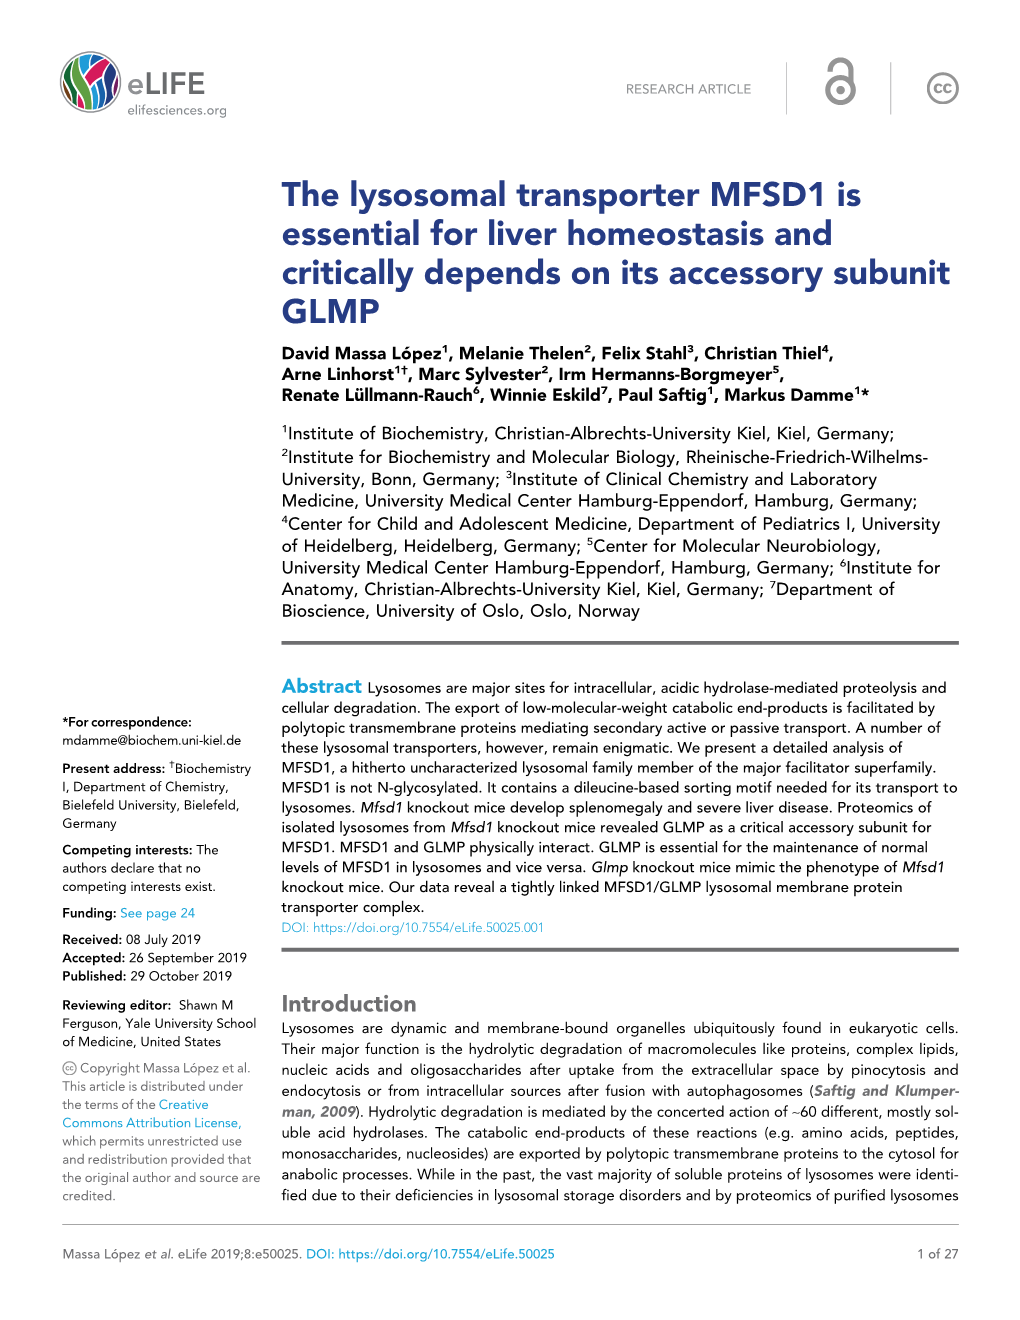 The Lysosomal Transporter MFSD1 Is Essential for Liver Homeostasis And